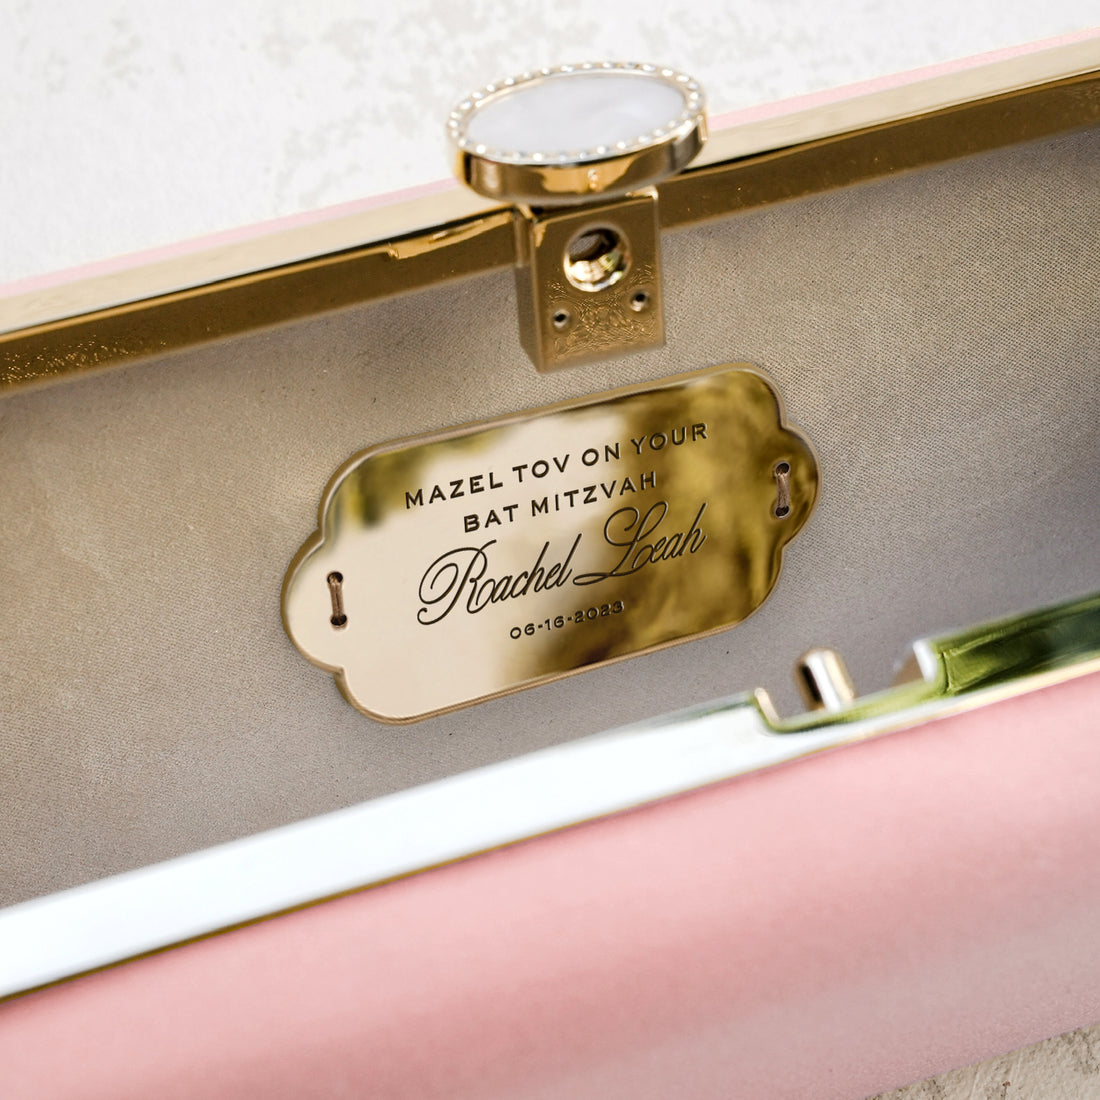 A Bat Mitzvah Personalized Bella Clutch Petite from The Bella Rosa Collection, perfect for a Bat Mitzvah gift.